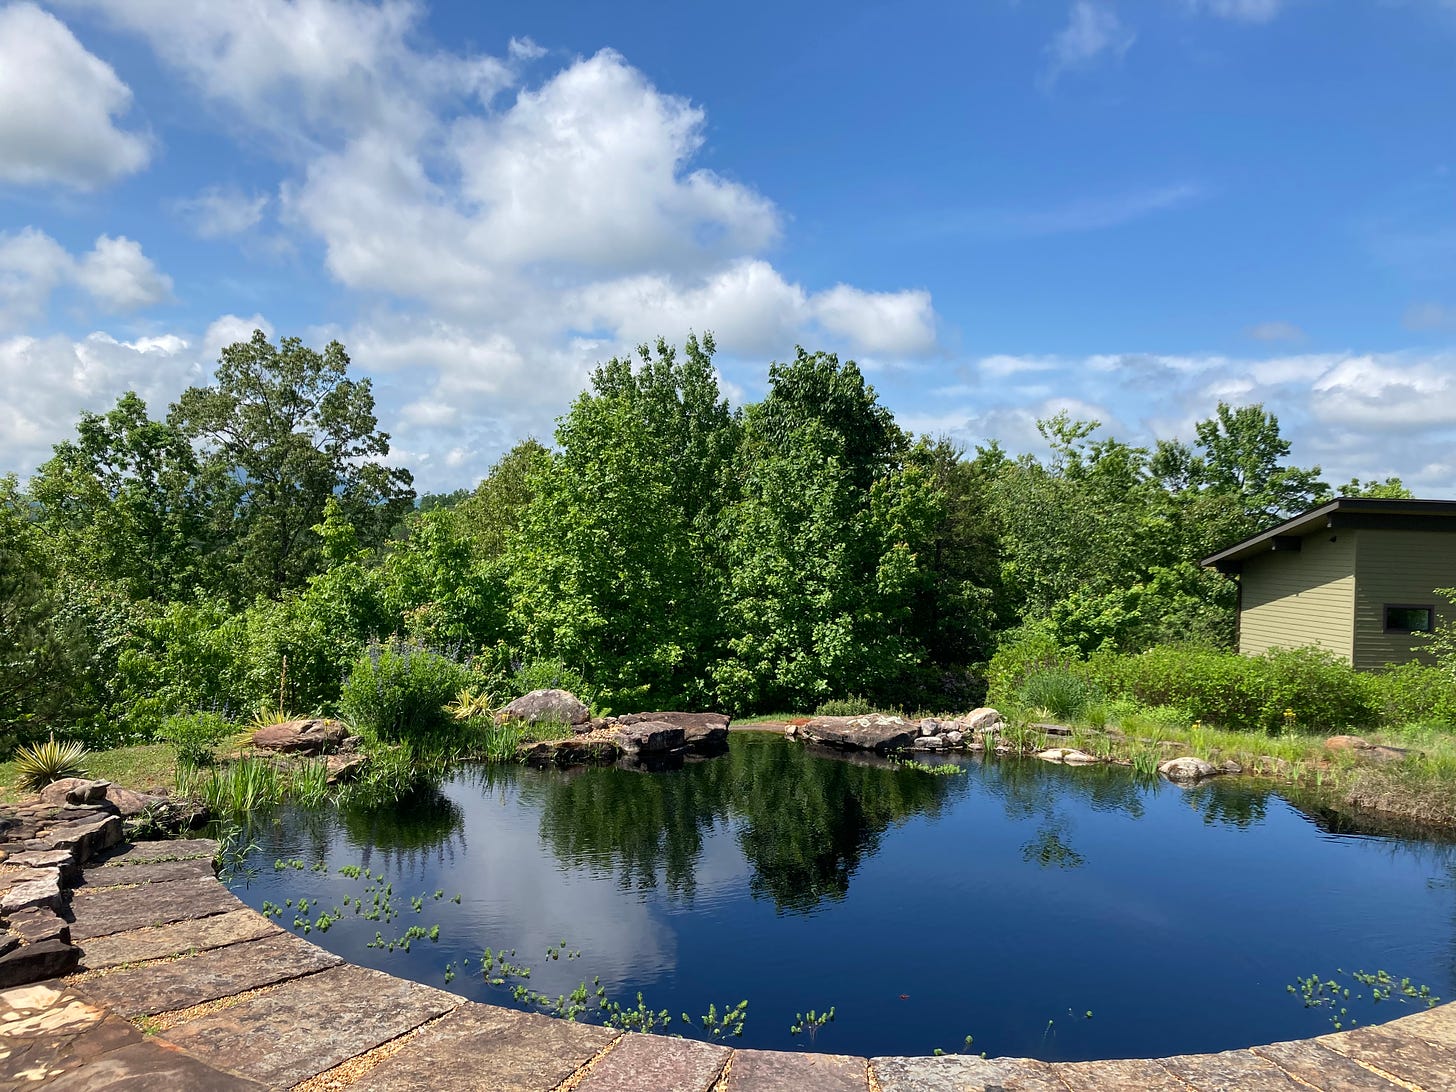 Picture of a blue sky with white clouds, green trees and a pond